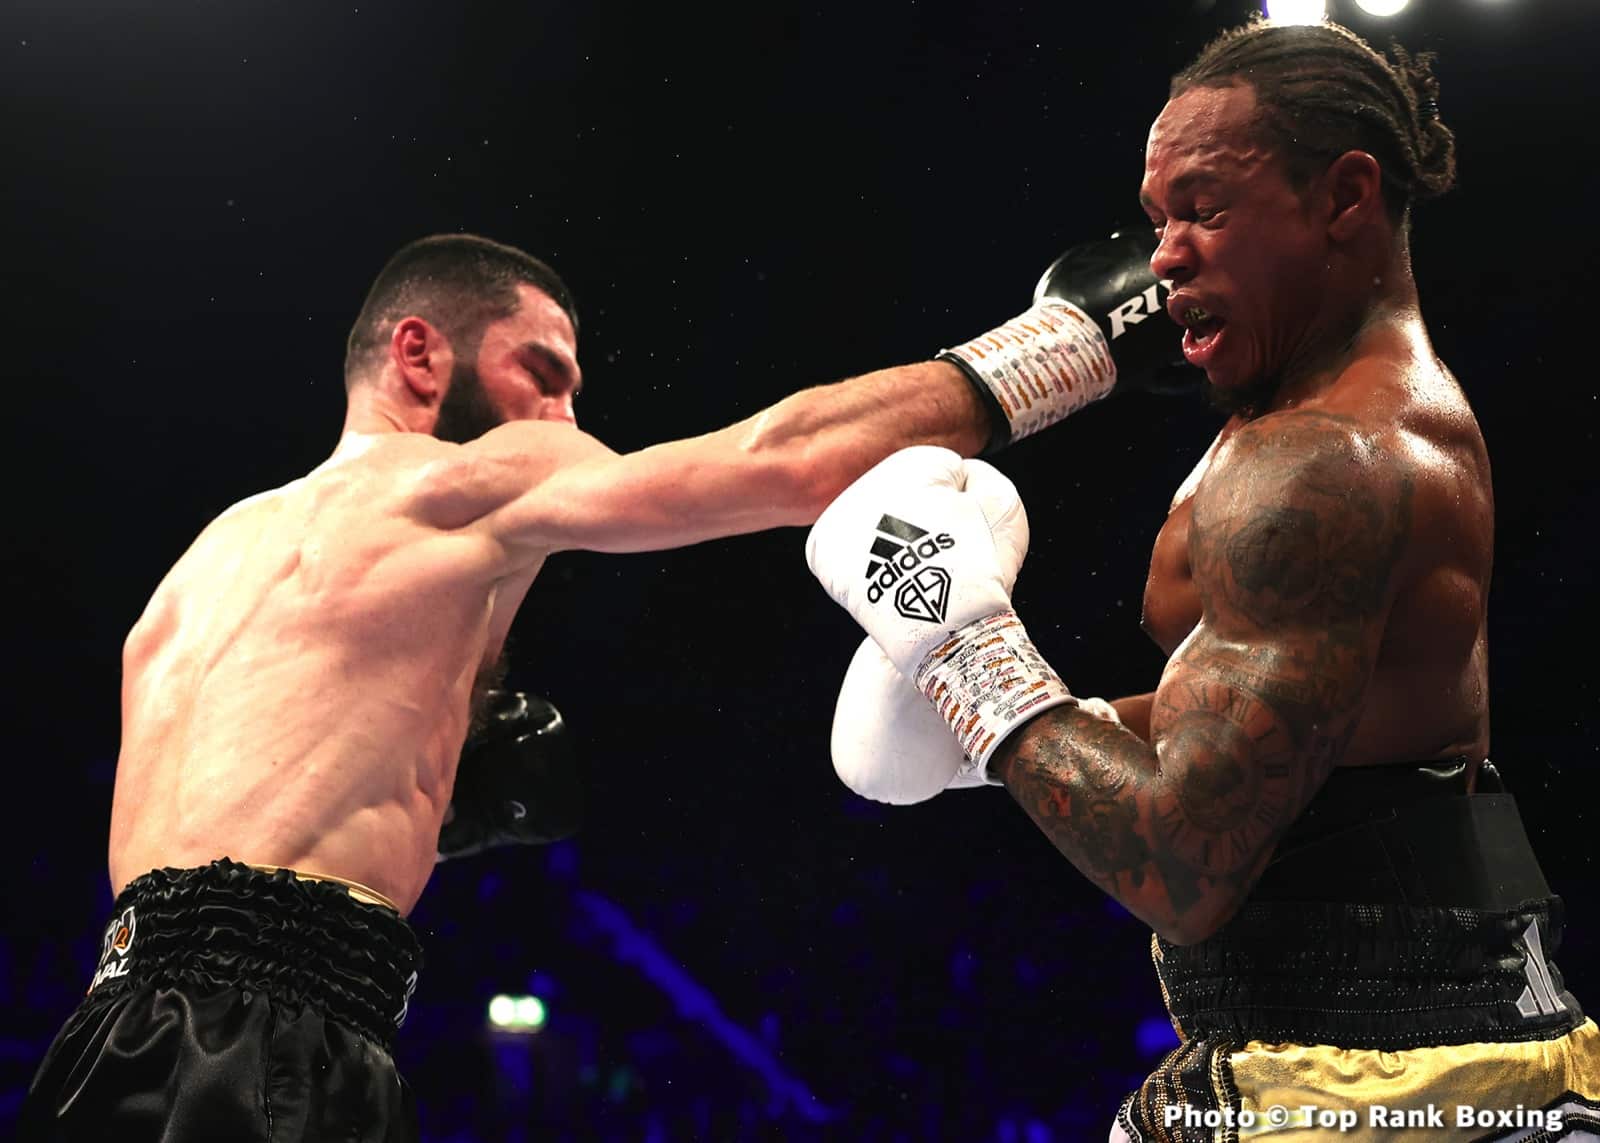 Artur Beterbiev stops Anthony Yarde in 8th round - Boxing Results